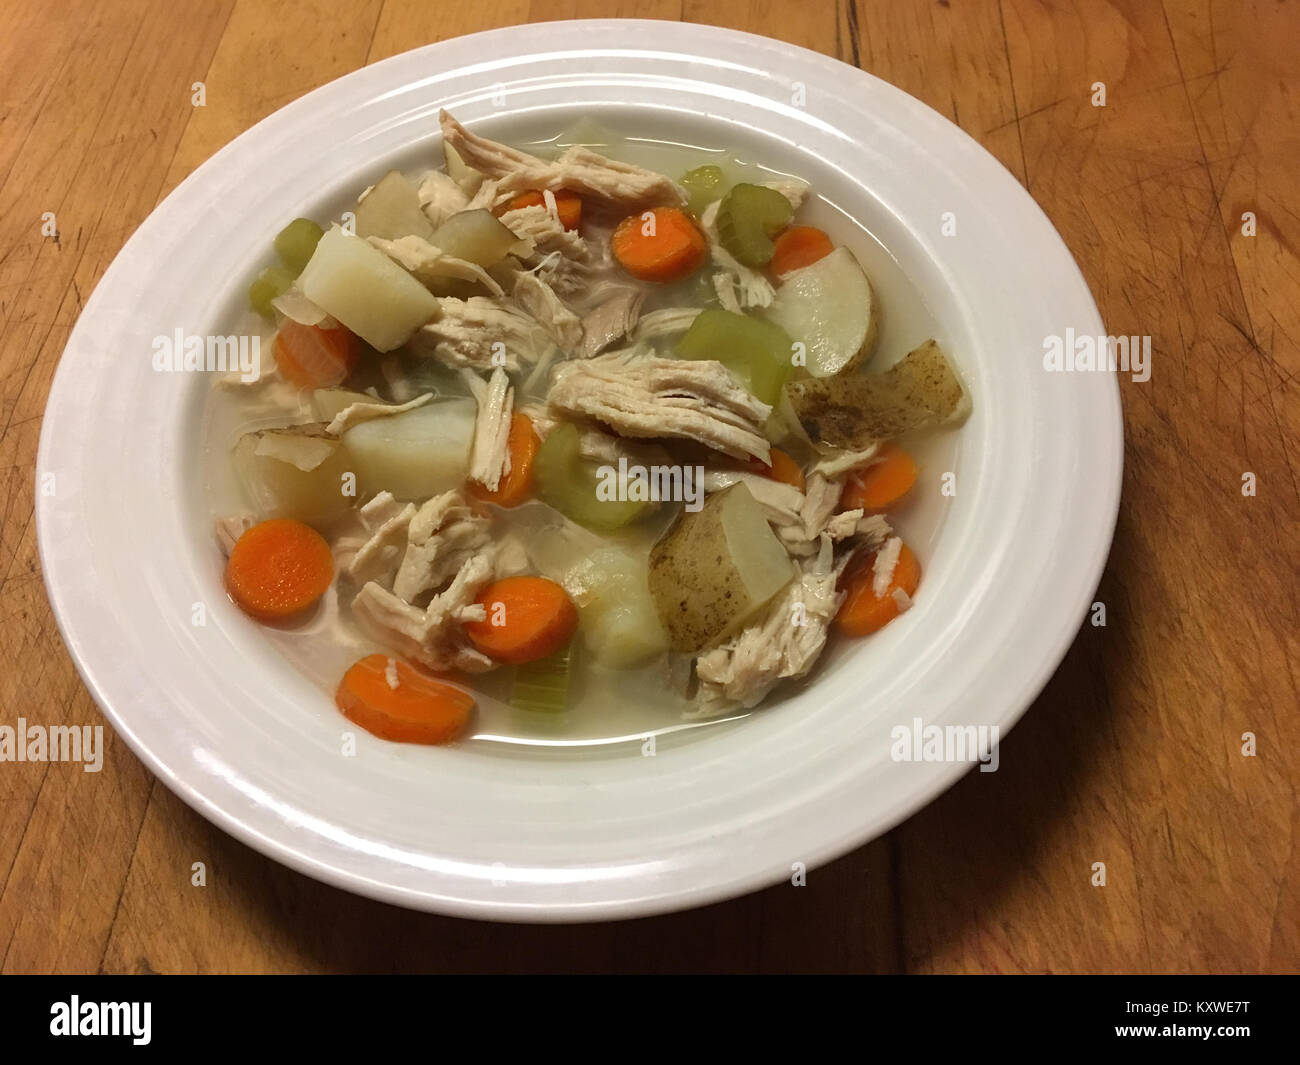 Bowl of homemade chicken vegetable soup on wooden cutting board Stock Photo